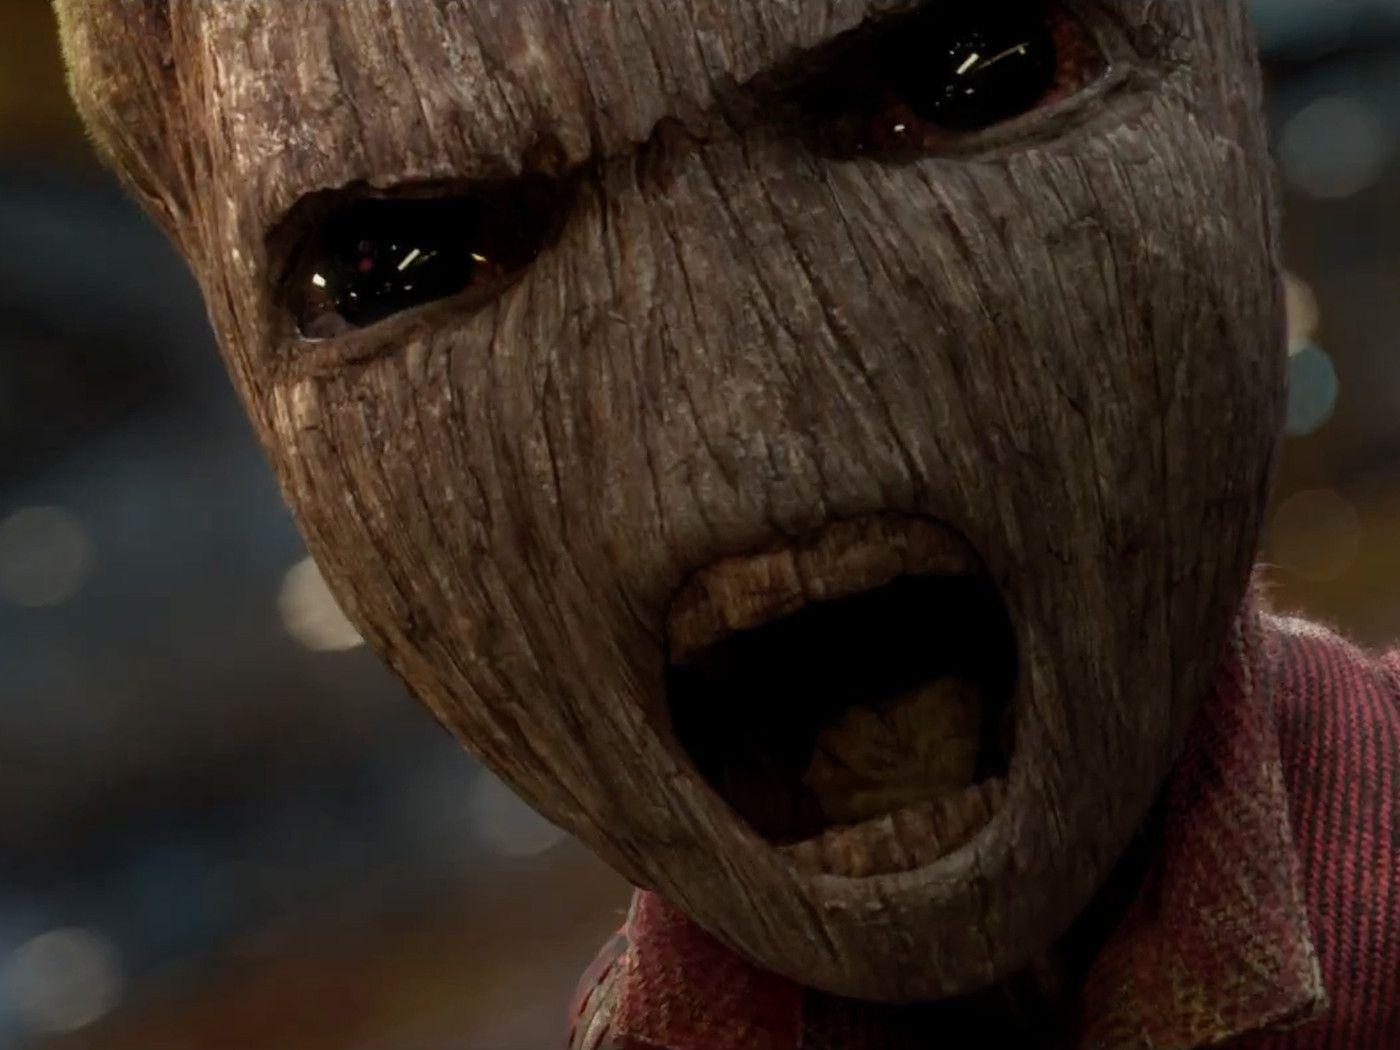 New Guardians of the Galaxy Vol. 2 trailer is packed with action